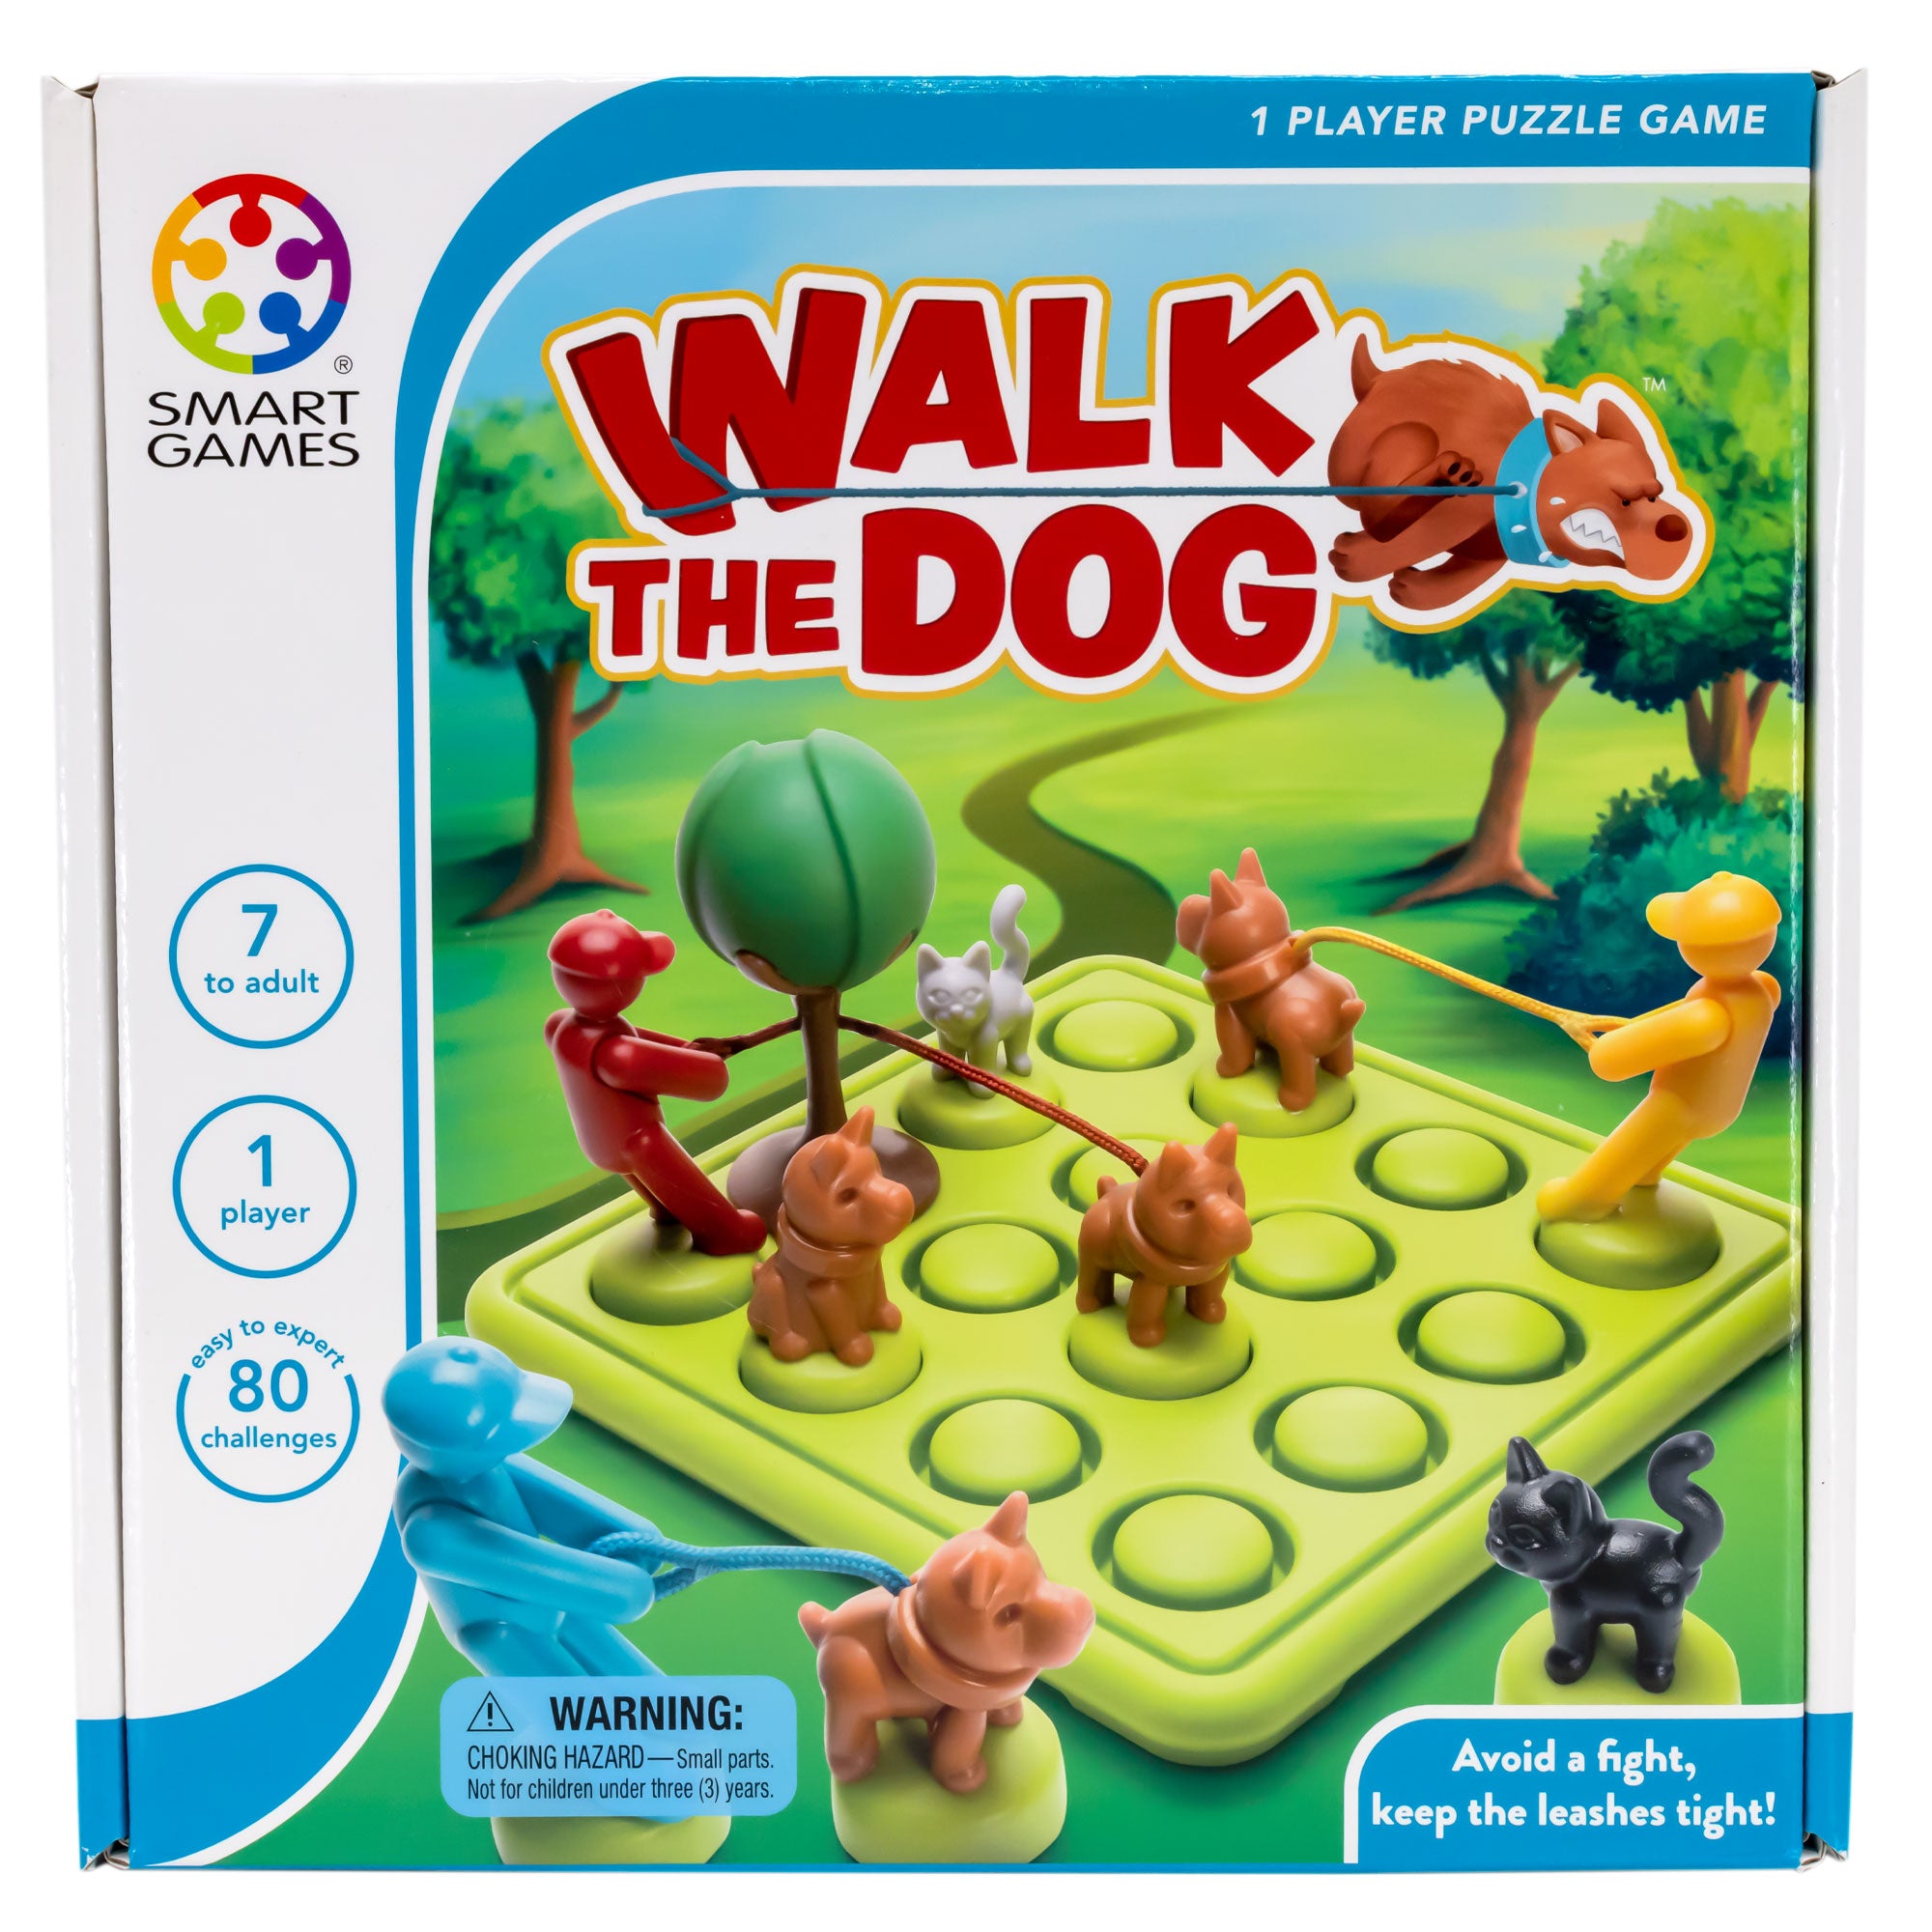 The Walk the Dog Smart box cover. The square game board is bright green with a grid of 4 by 4 circles that allow pieces to be placed on top. The pieces on top are colorful men with leashes attached to a dog, cats, and a tree piece. The background shows a park, but is out of focus. The box indicates that the game is 1-player and is recommended for age 7 or older. There are 80 challenges.